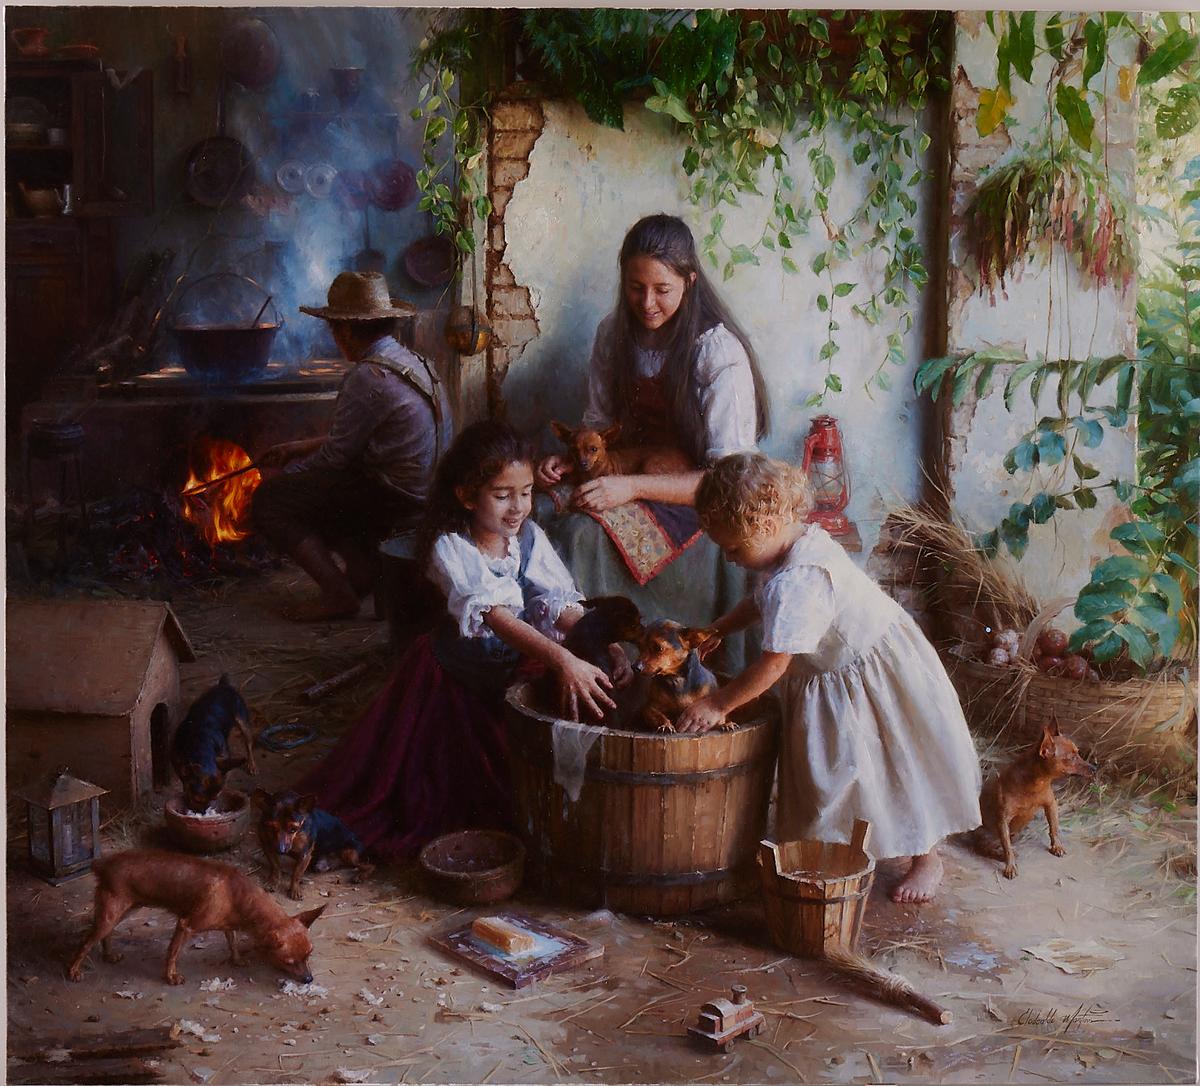 The bronze award-winning work “Bath Time” by Clodoaldo Geovani Martins of Brazil. Oil on Canvas; 36 inches by 40 inches. (NTD International Figure Painting Competition)